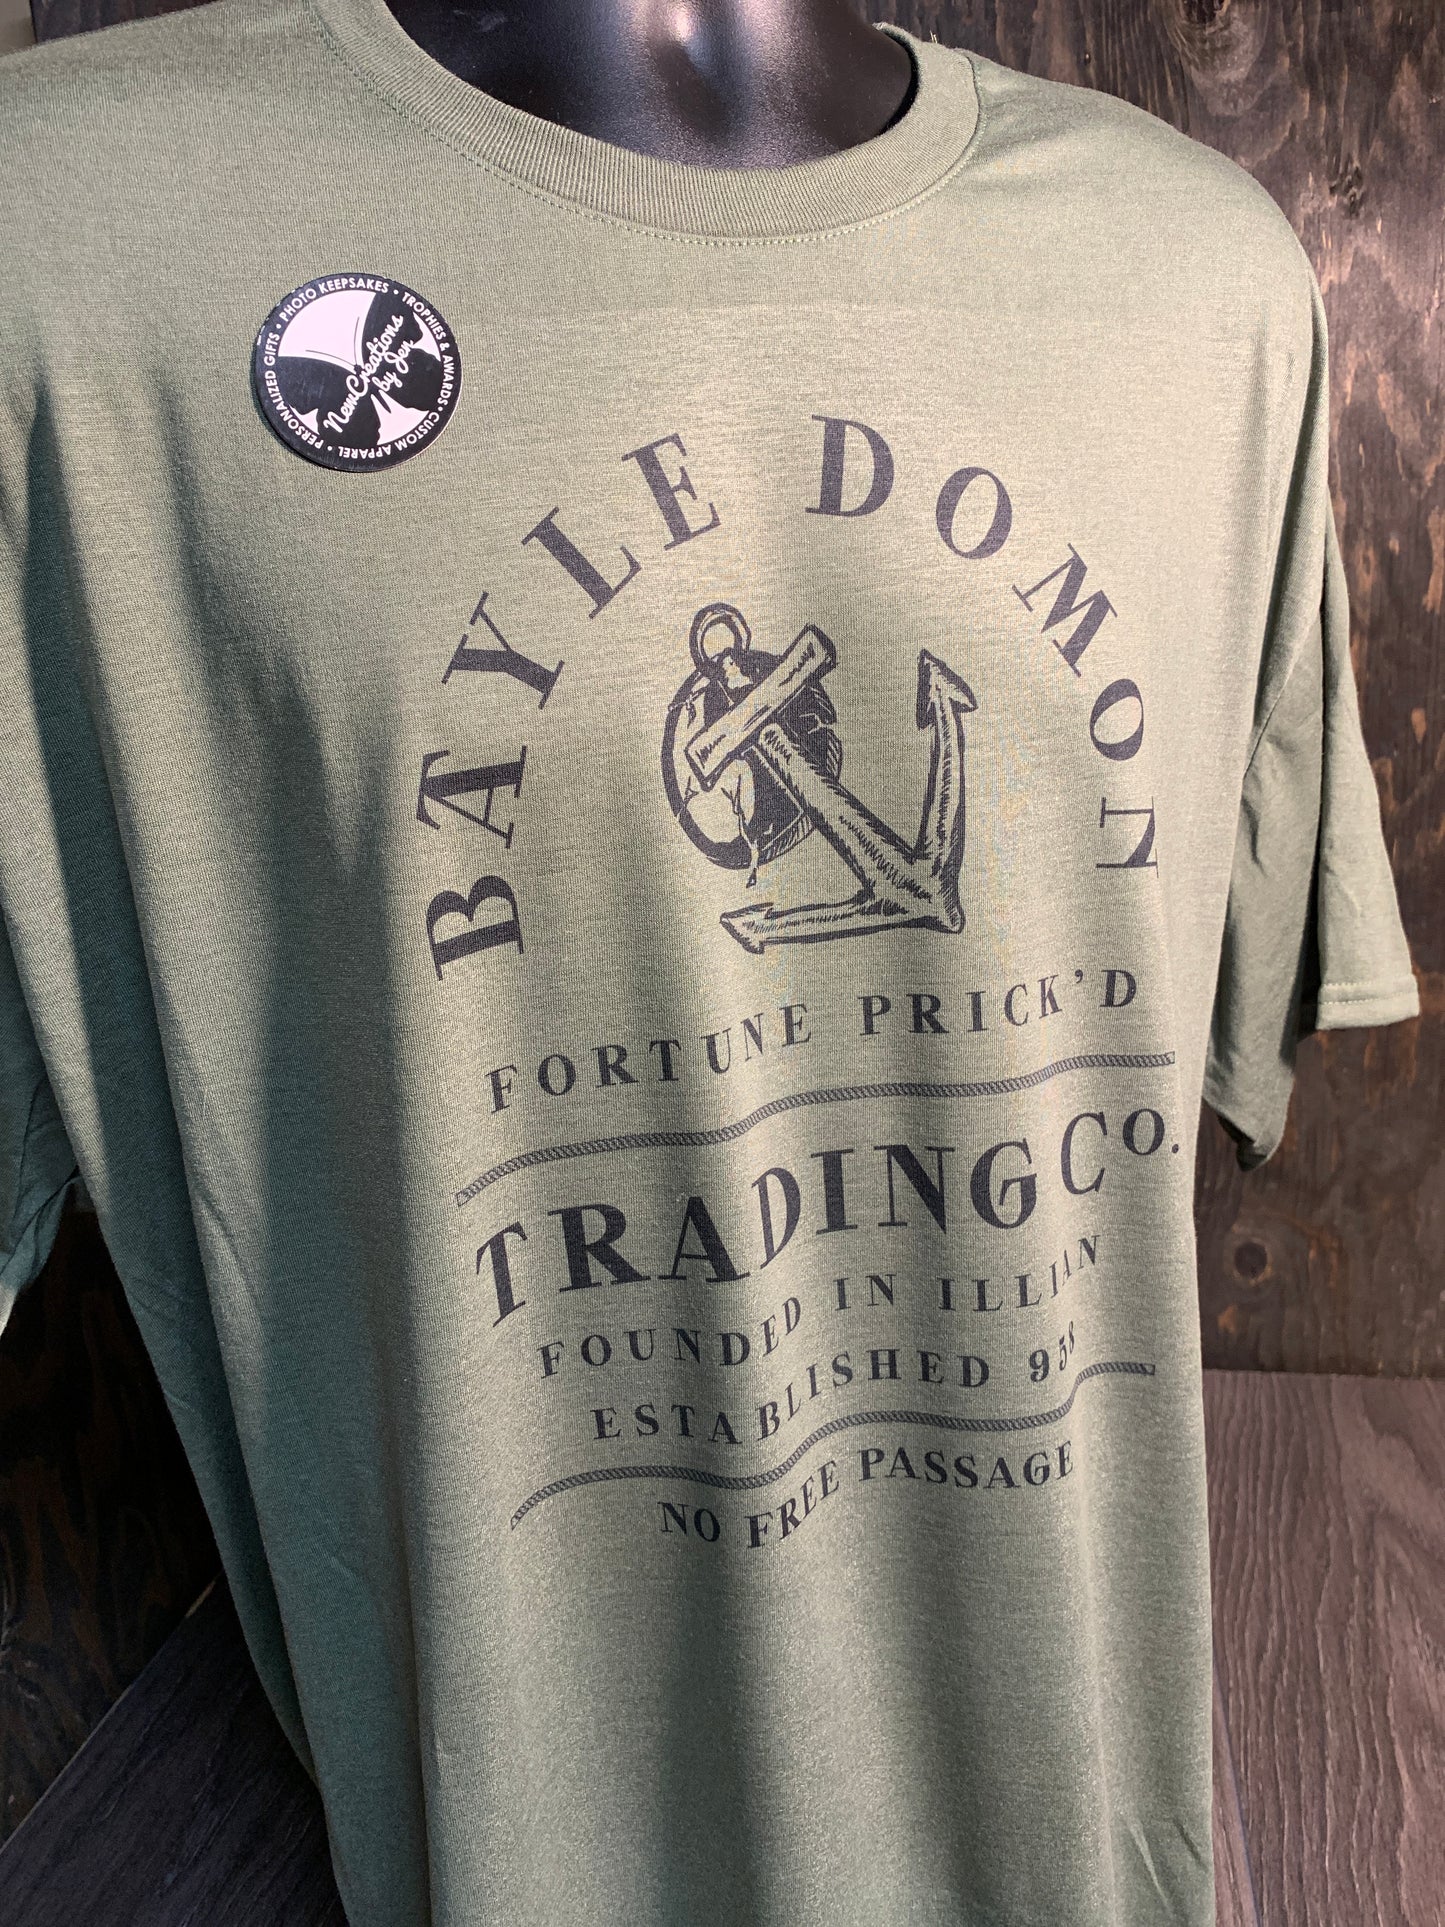 Bayle Domon Trading Co - Wheel of Time Inspired  Souvenir Lightweight  Tees